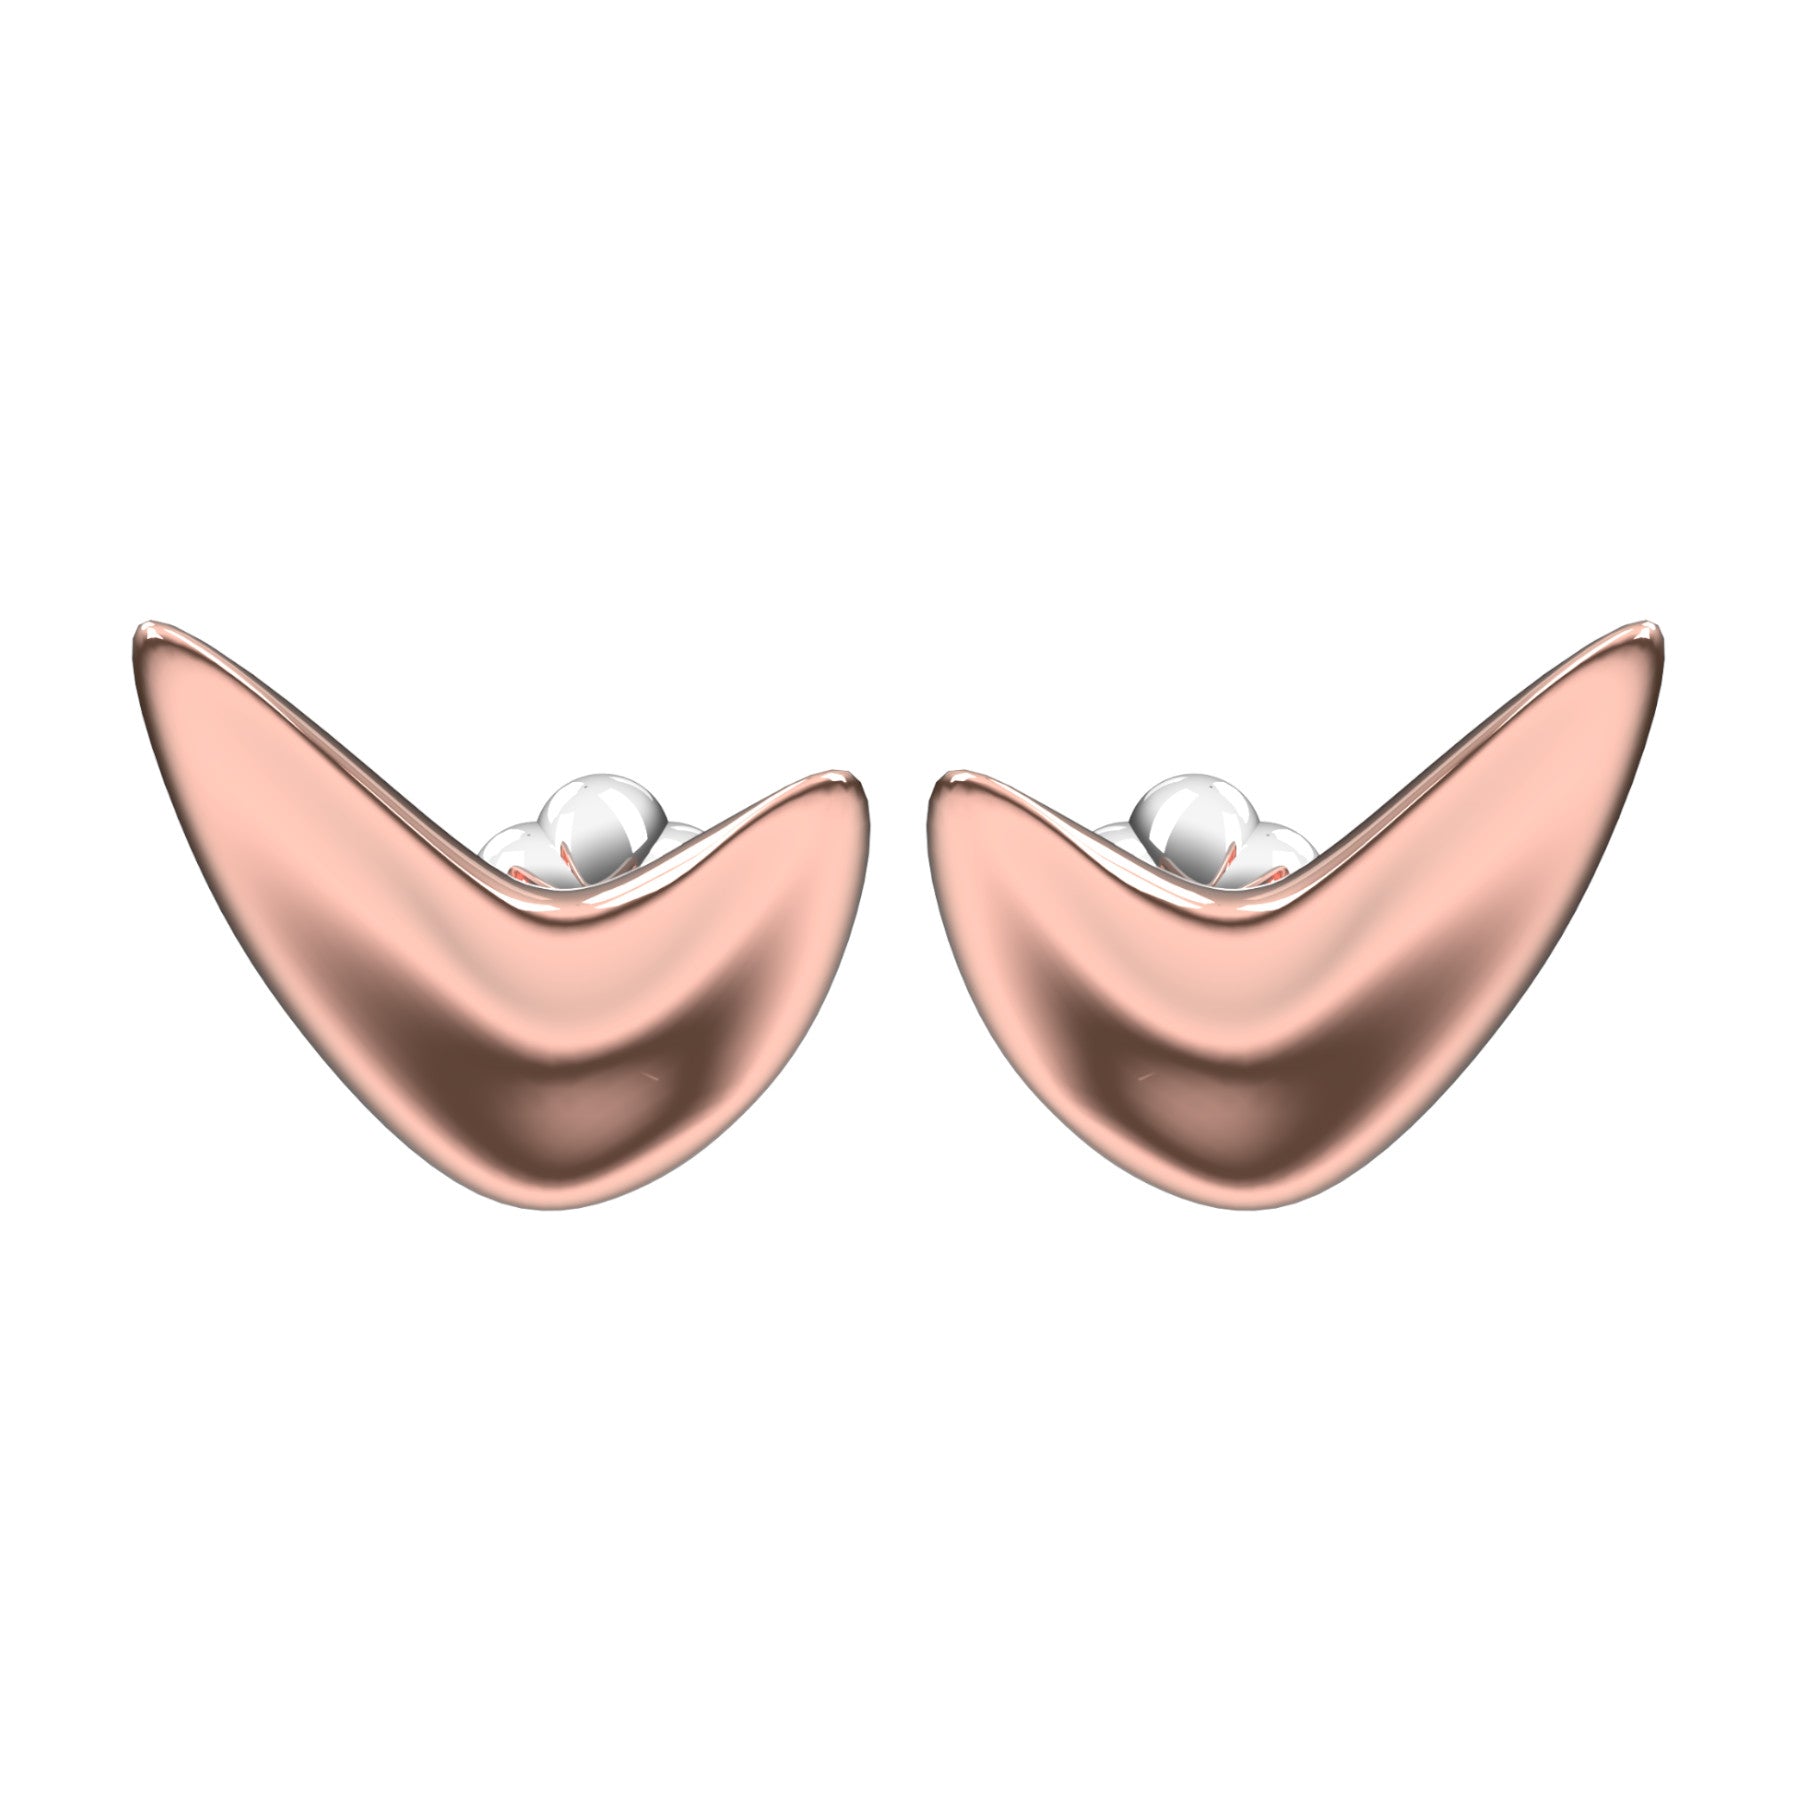 lobe earring, 18 K pink gold, weight about 10,6 g. (0.37 oz) size 23x19x6 mm